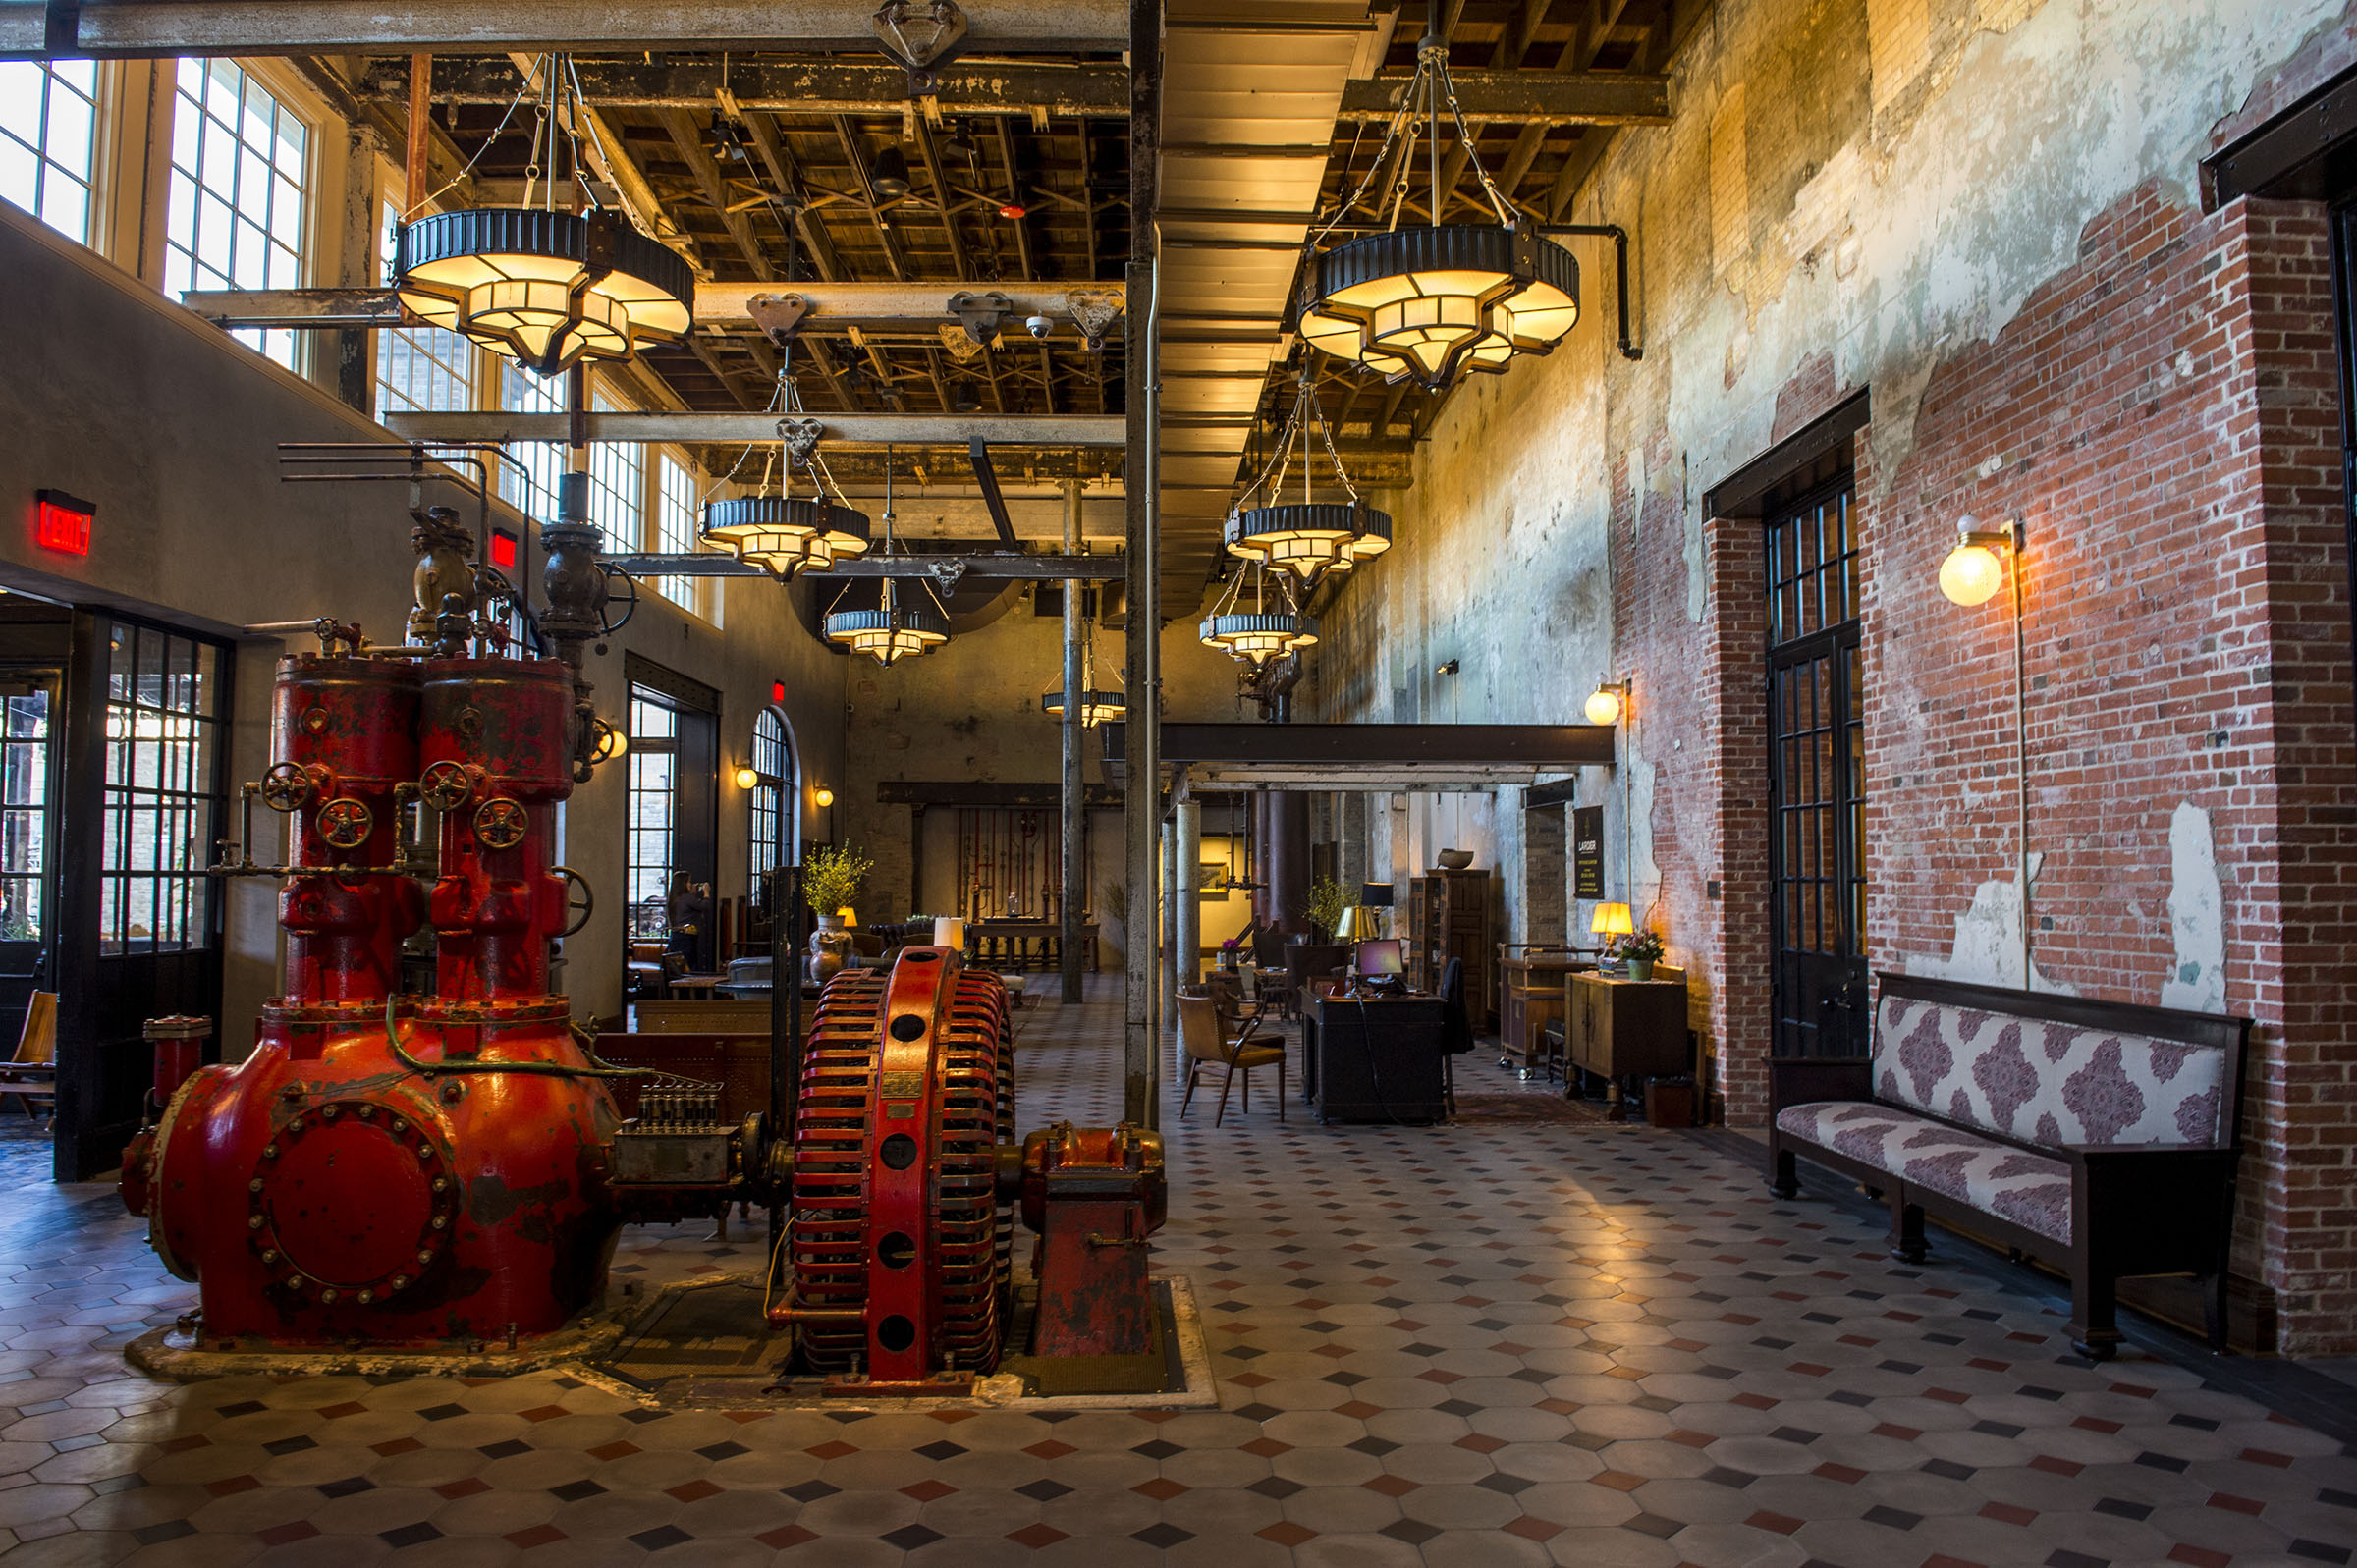 Large industrial fixtures and brick walls inside of a hotel lobby